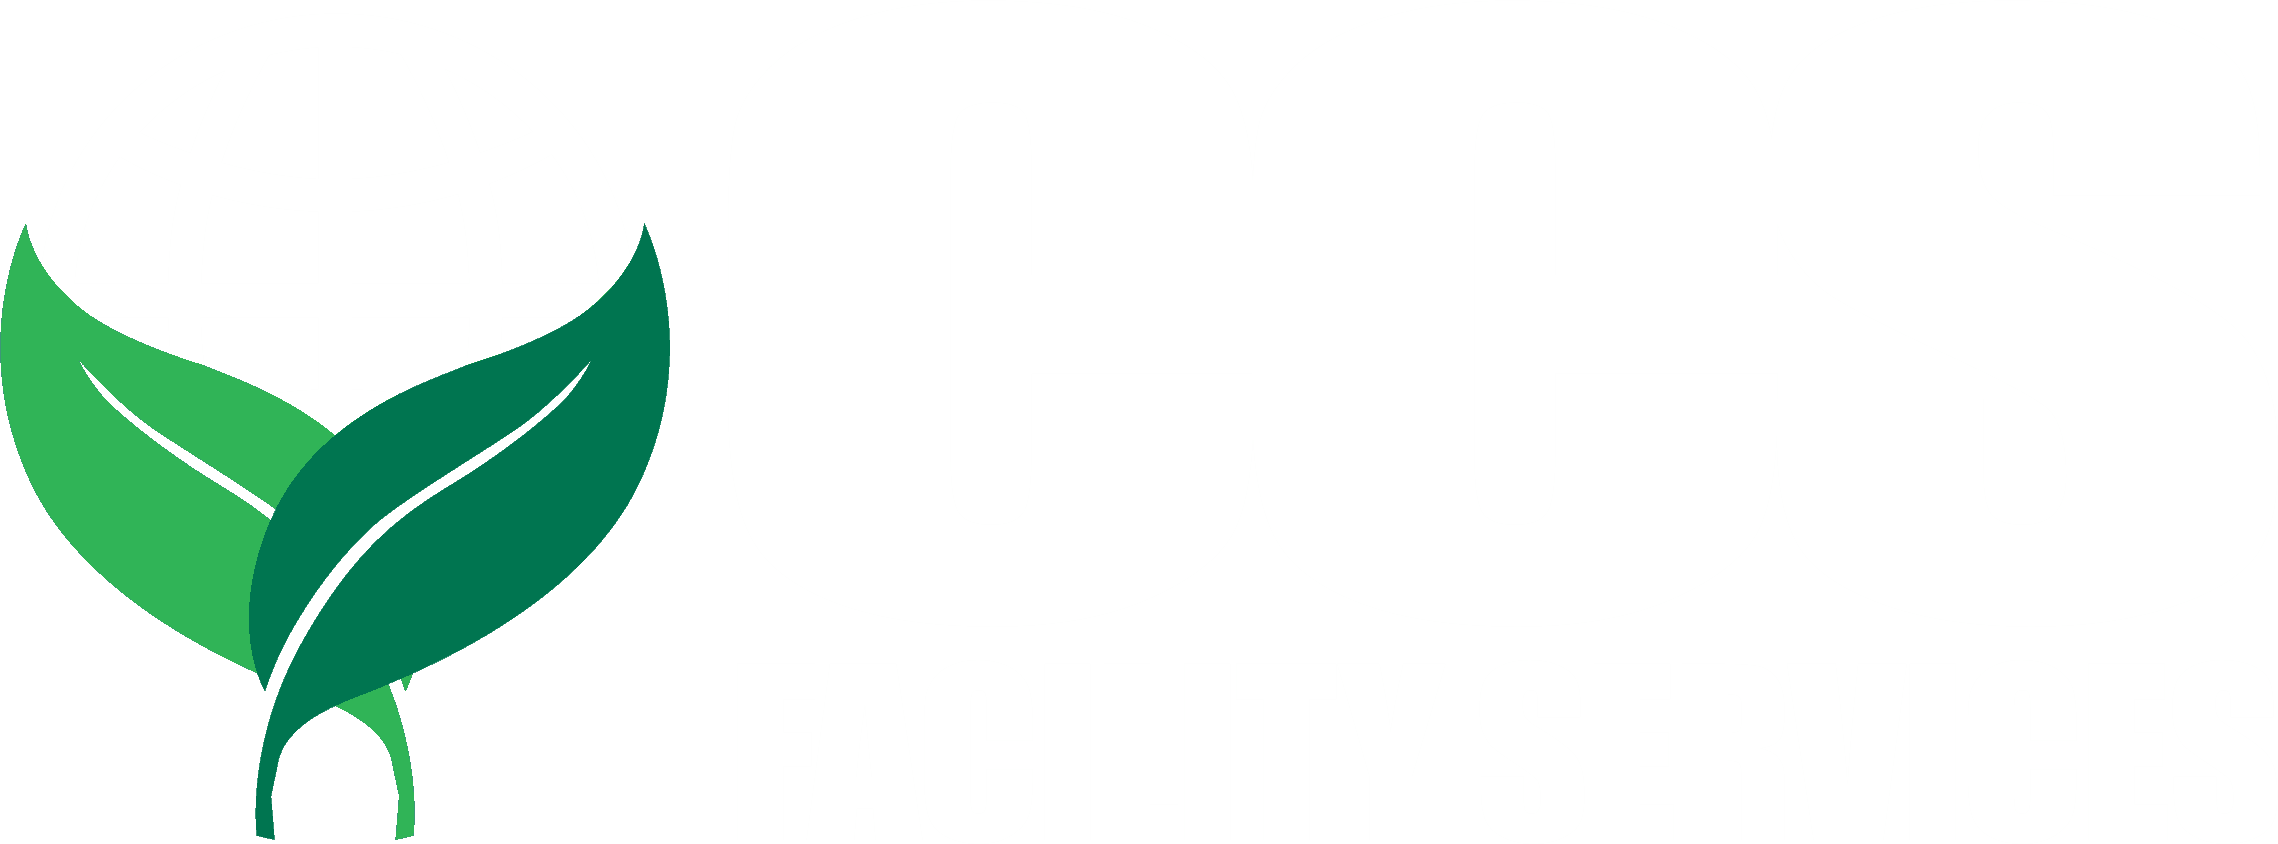 CCS Facility Services Reverse with Green